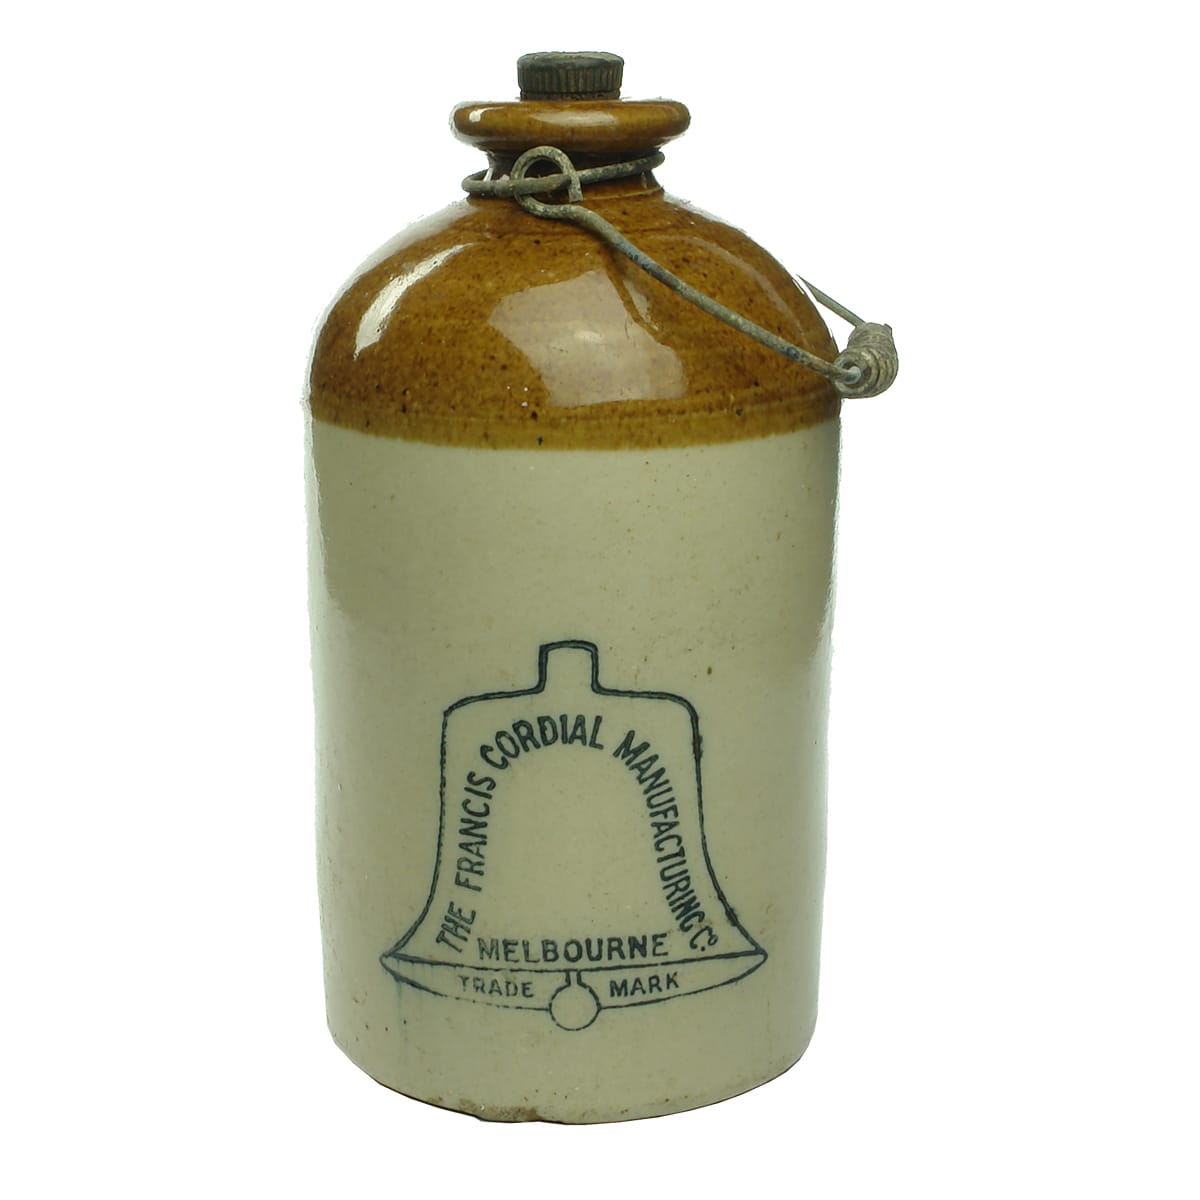 Demijohn. The Francis Cordial Manufacturing Co., Melbourne. Printed. Tan Top. Internal Thread. (Victoria)